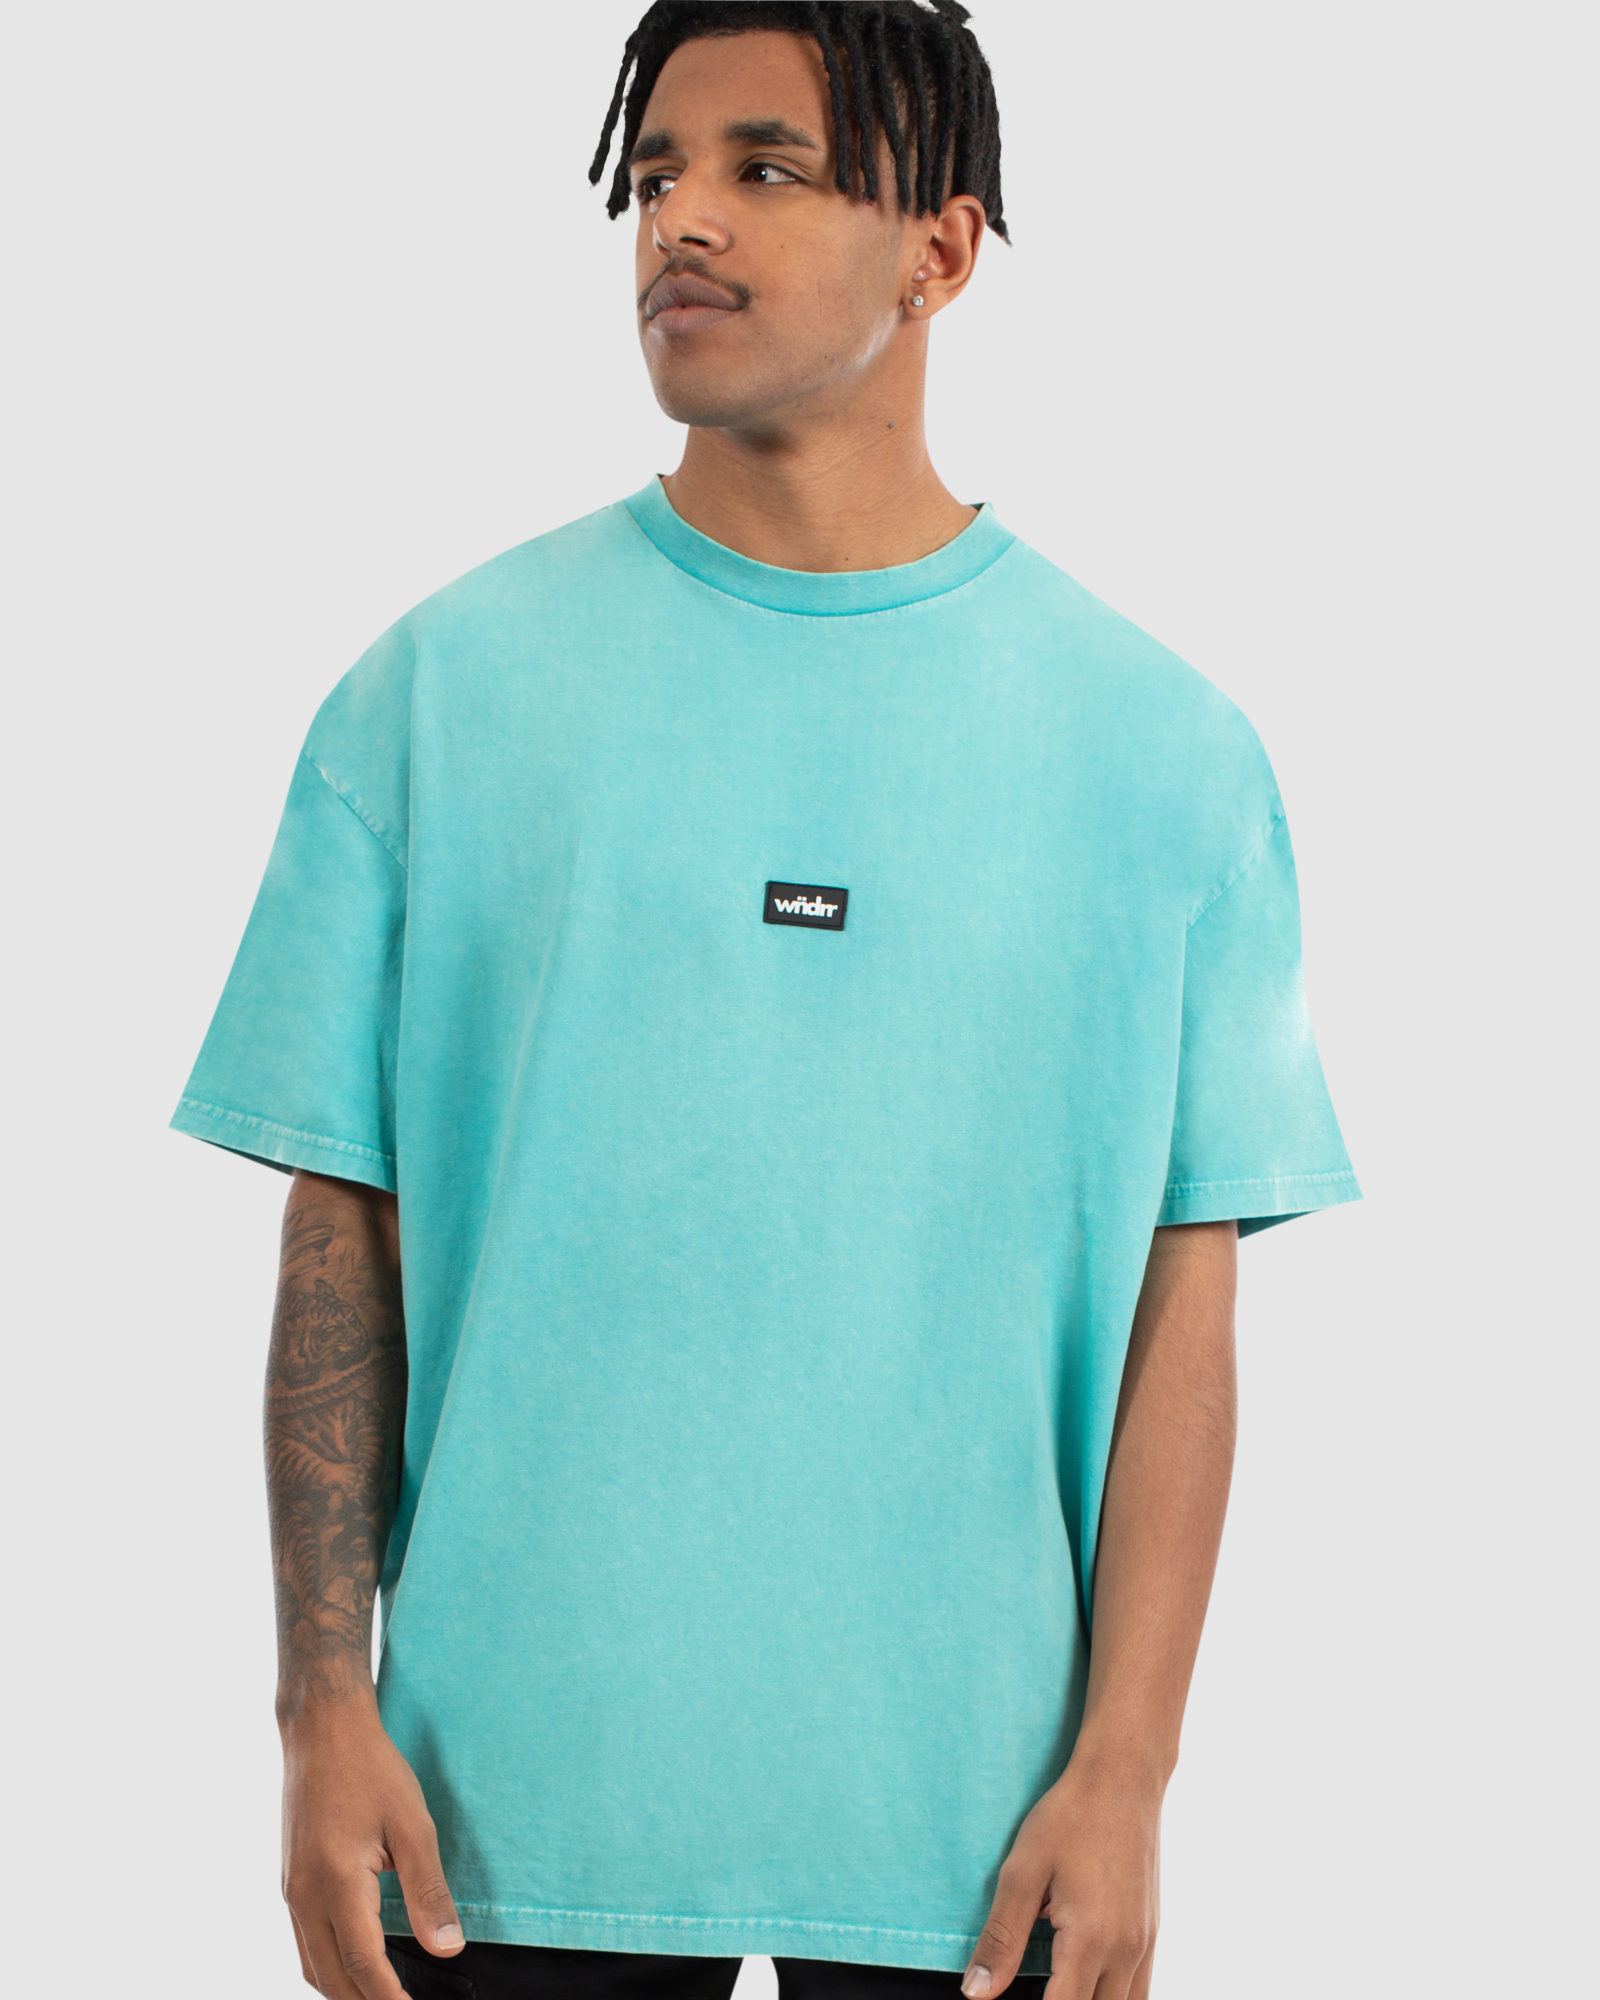 HOXTON VINTAGE FIT TEE - WASHED TEAL